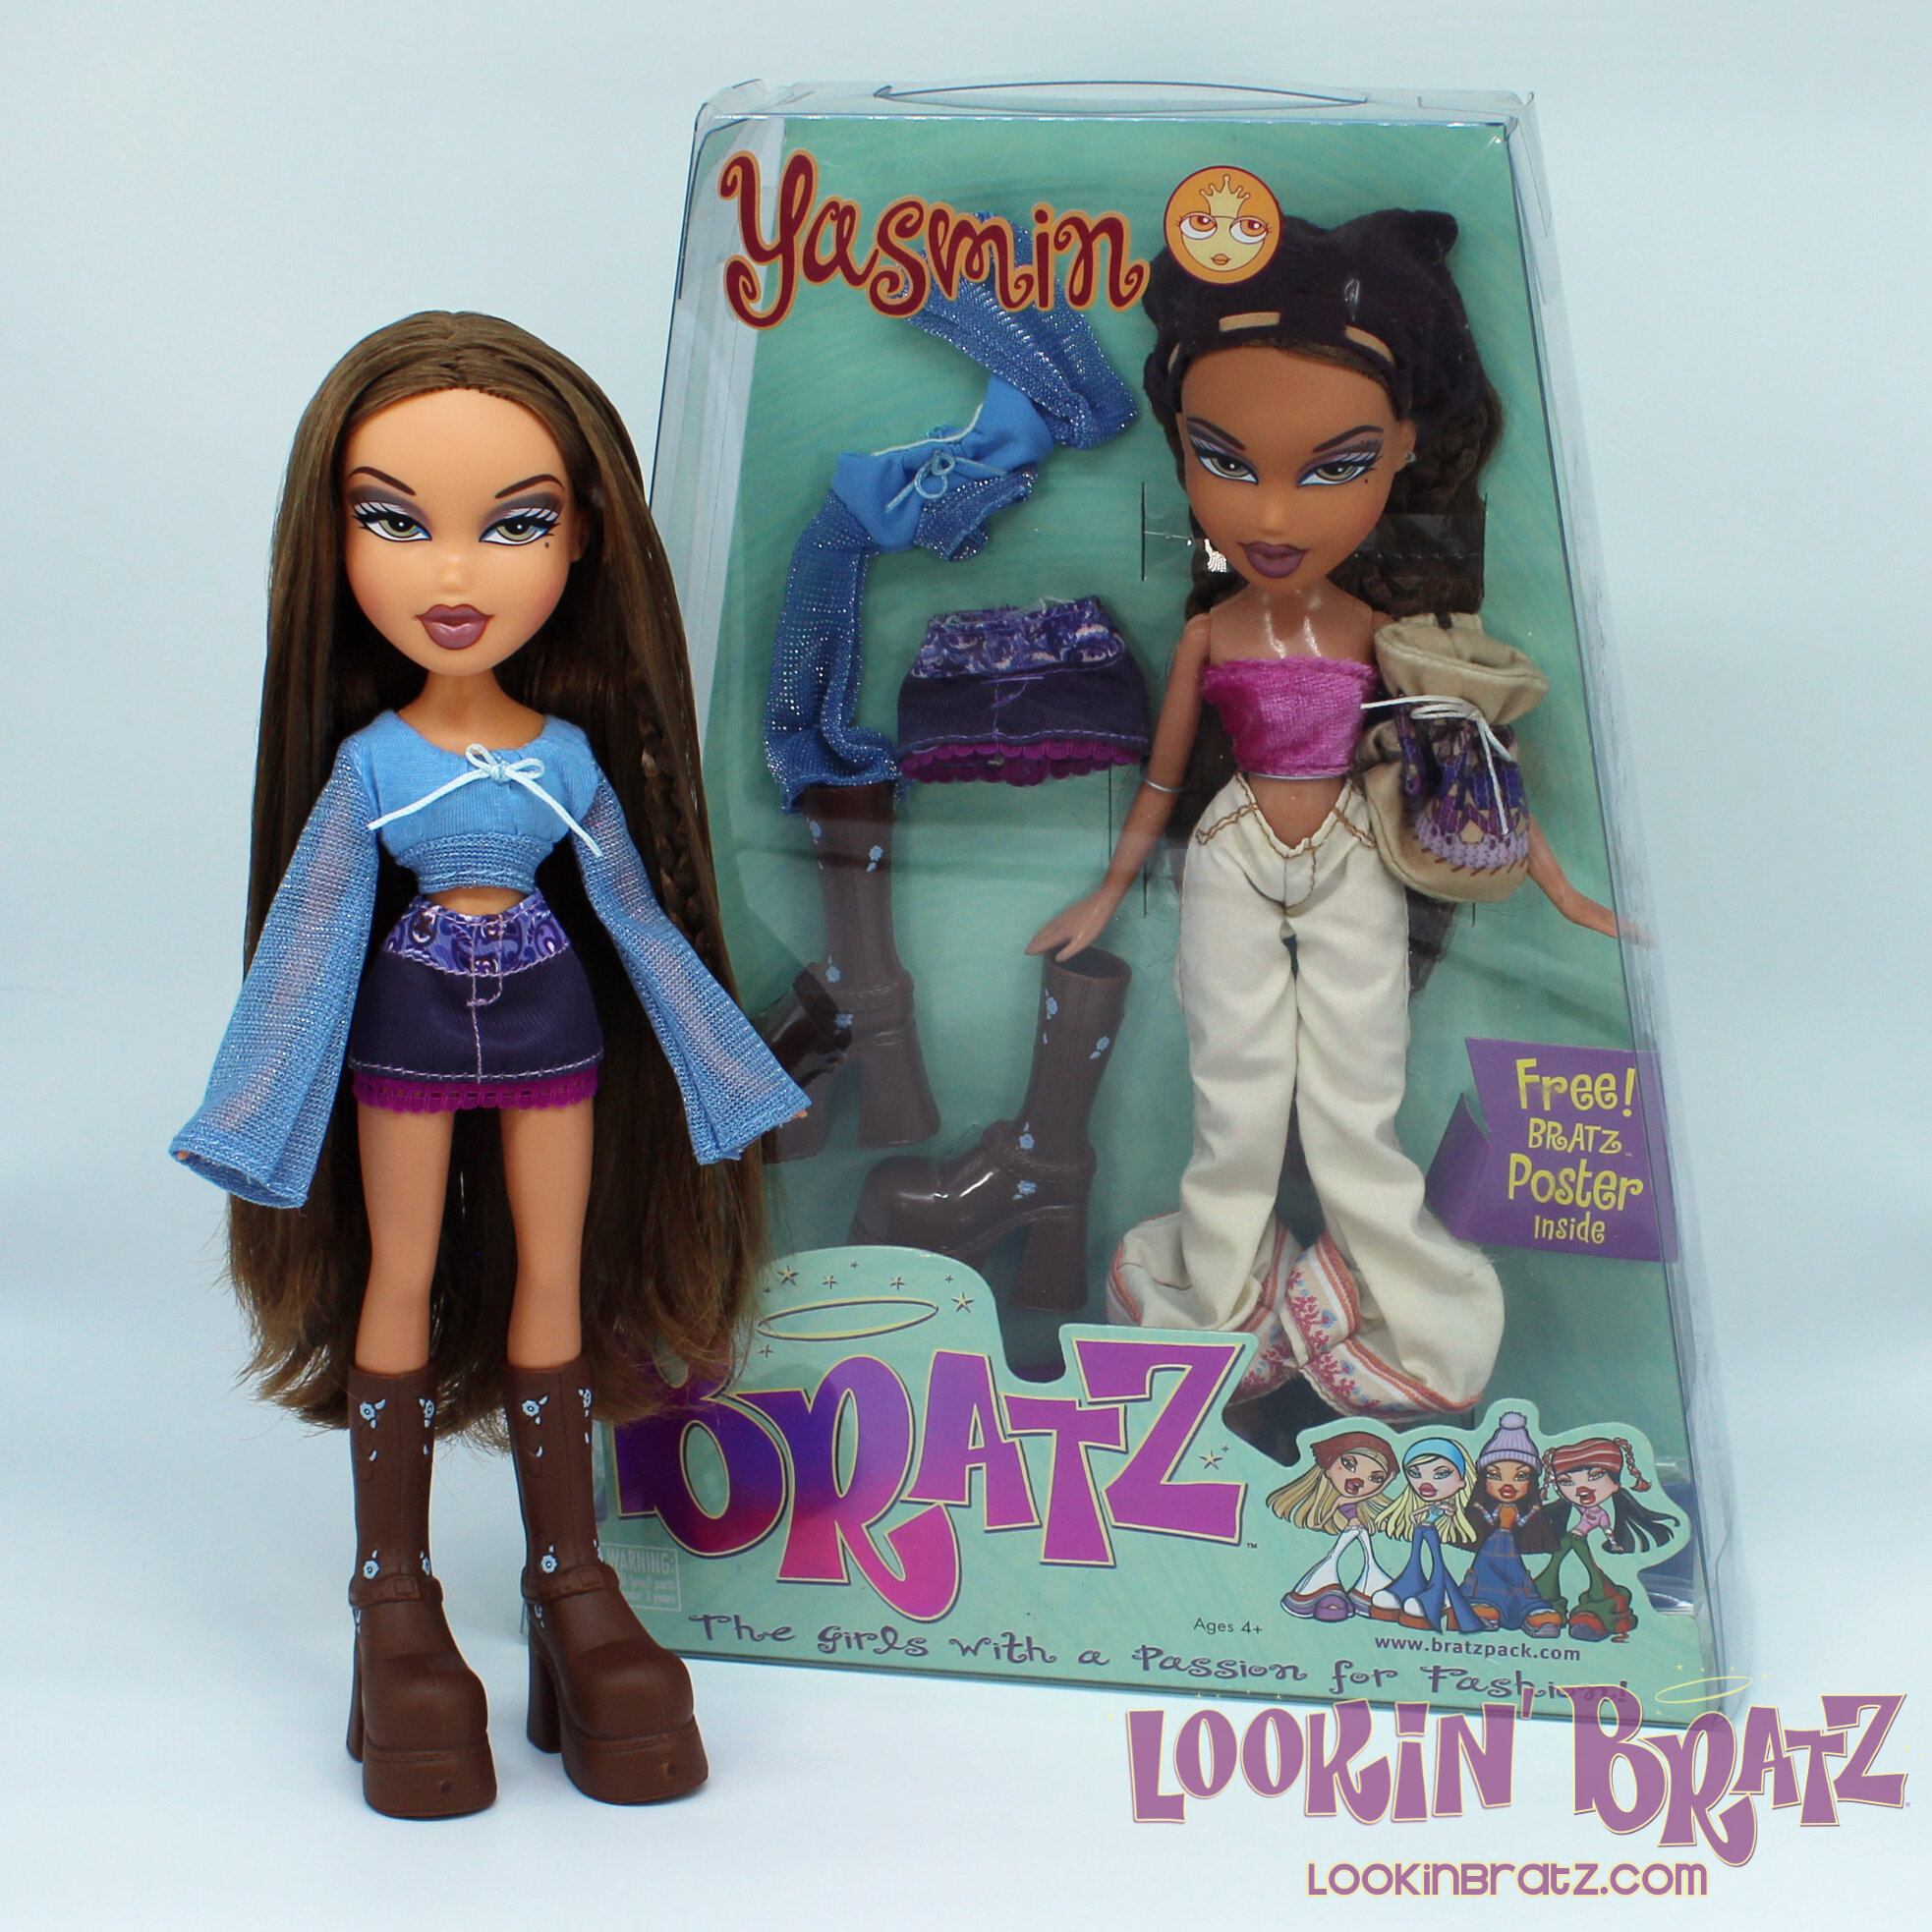 Bratz 20 Yearz Special Edition Yasmin (2021; unboxed) and Bratz First Edition Re-Release Yasmin (2005; boxed)